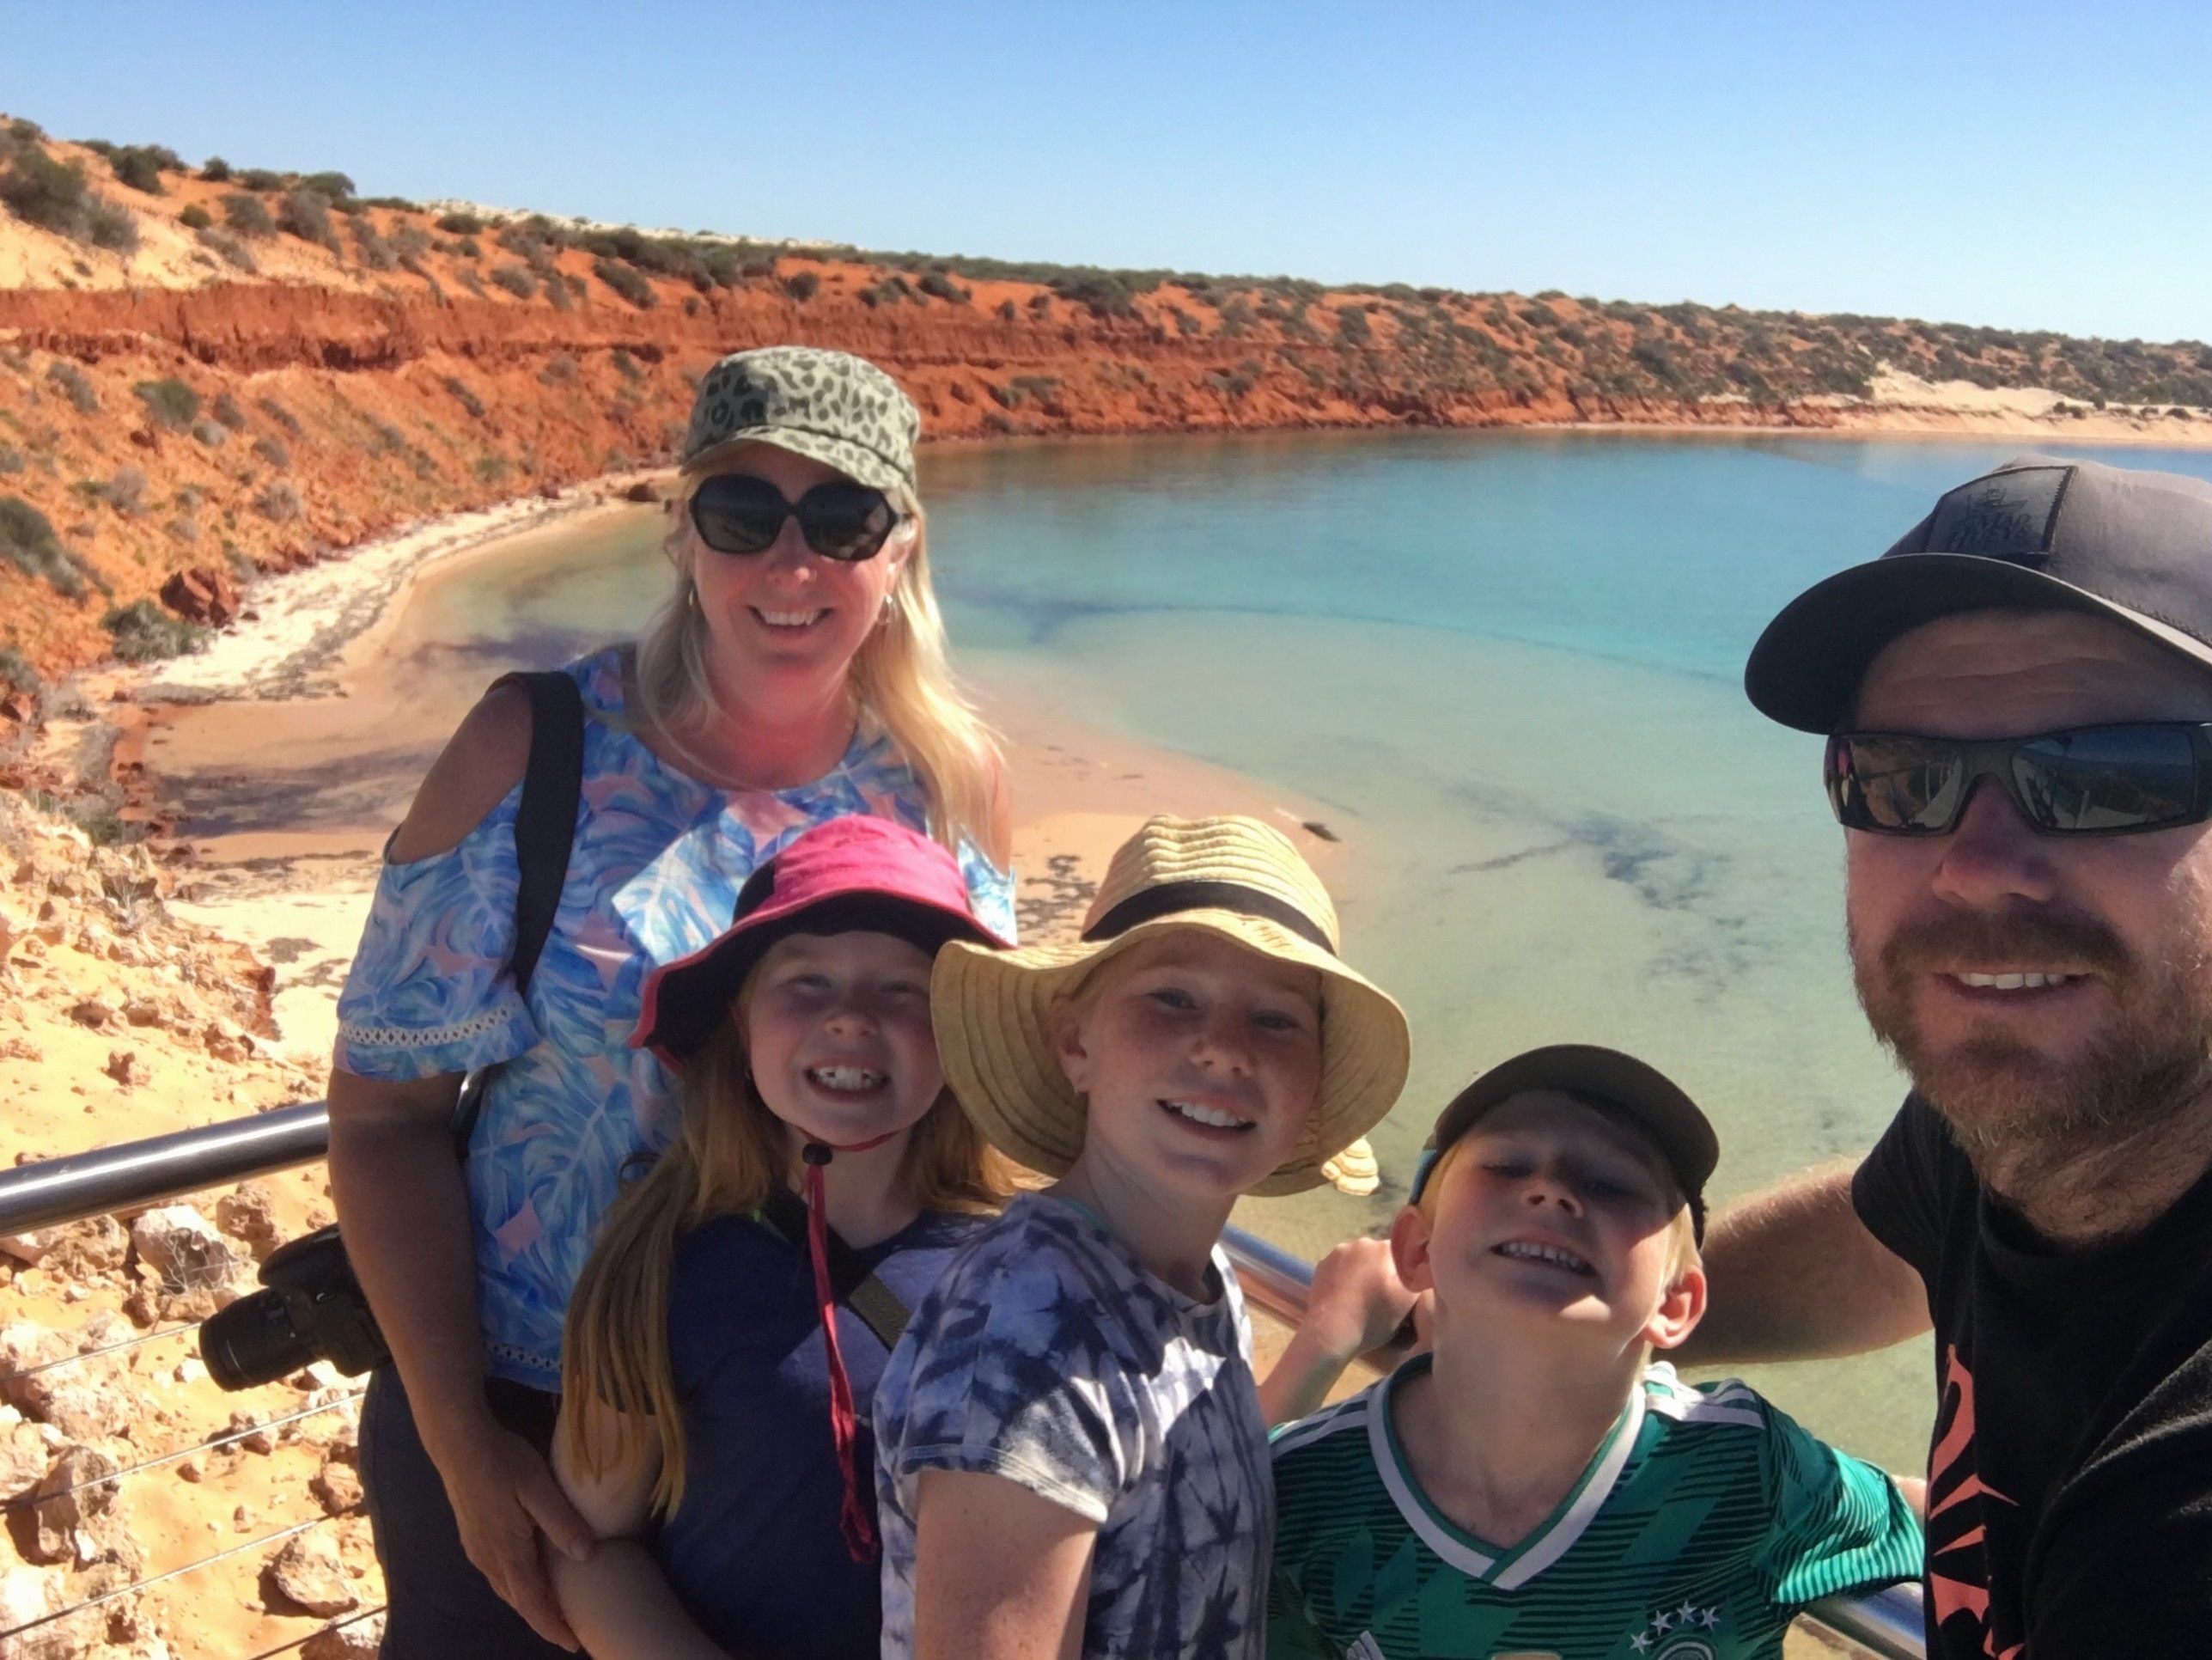 How Travel reconnects you and your family